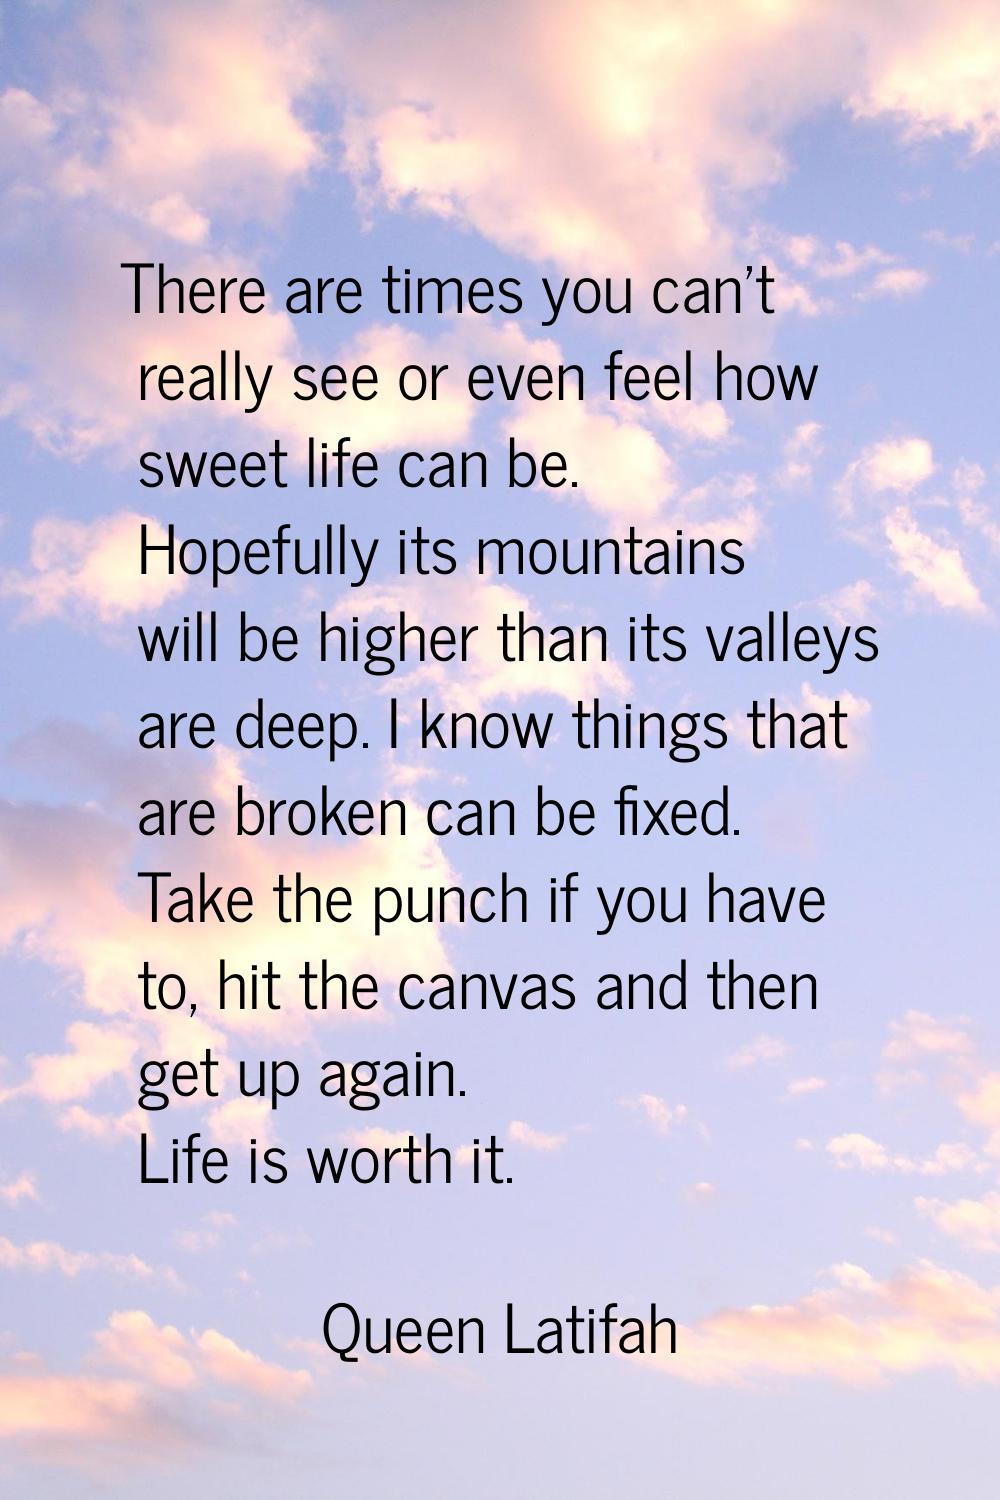 There are times you can't really see or even feel how sweet life can be. Hopefully its mountains wi